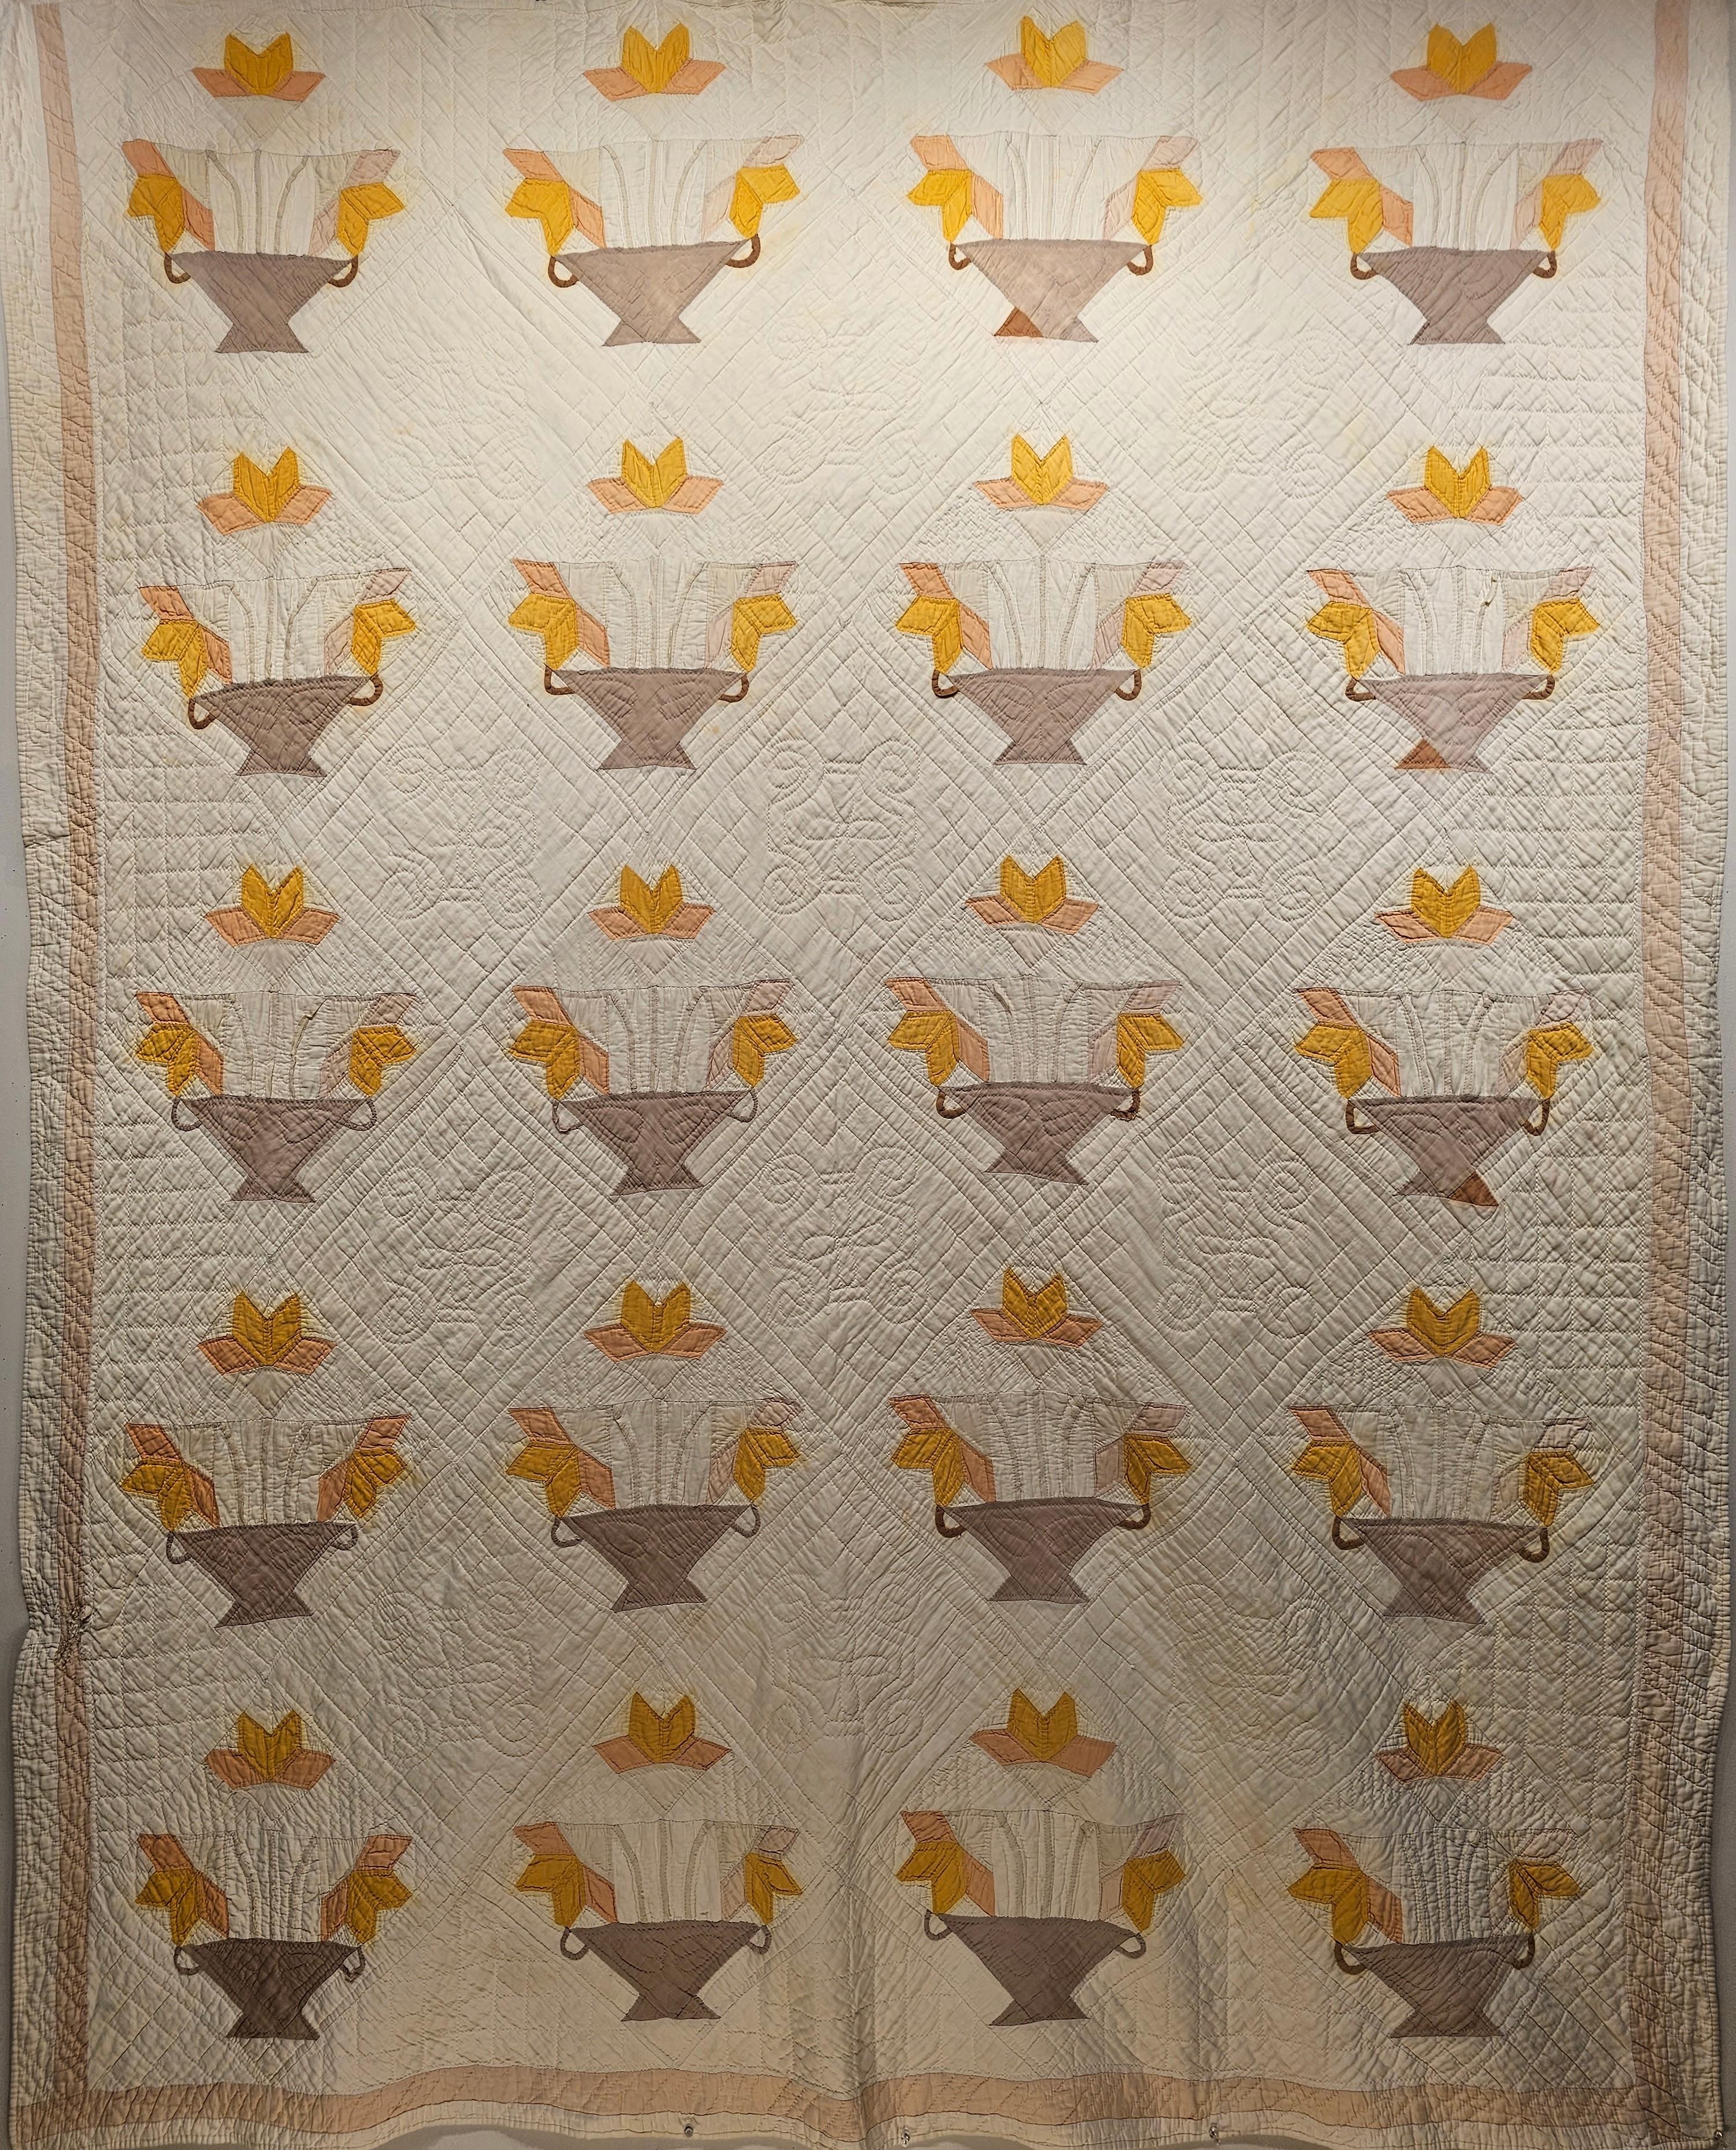 This beautiful American Applique Quilt was hand stitched in the early part of the 20th century. The American Applique Quilt is in a “Basket” pattern with the basket in brown color and the flowers in yellow, pink, and ivory on an ivory background. 